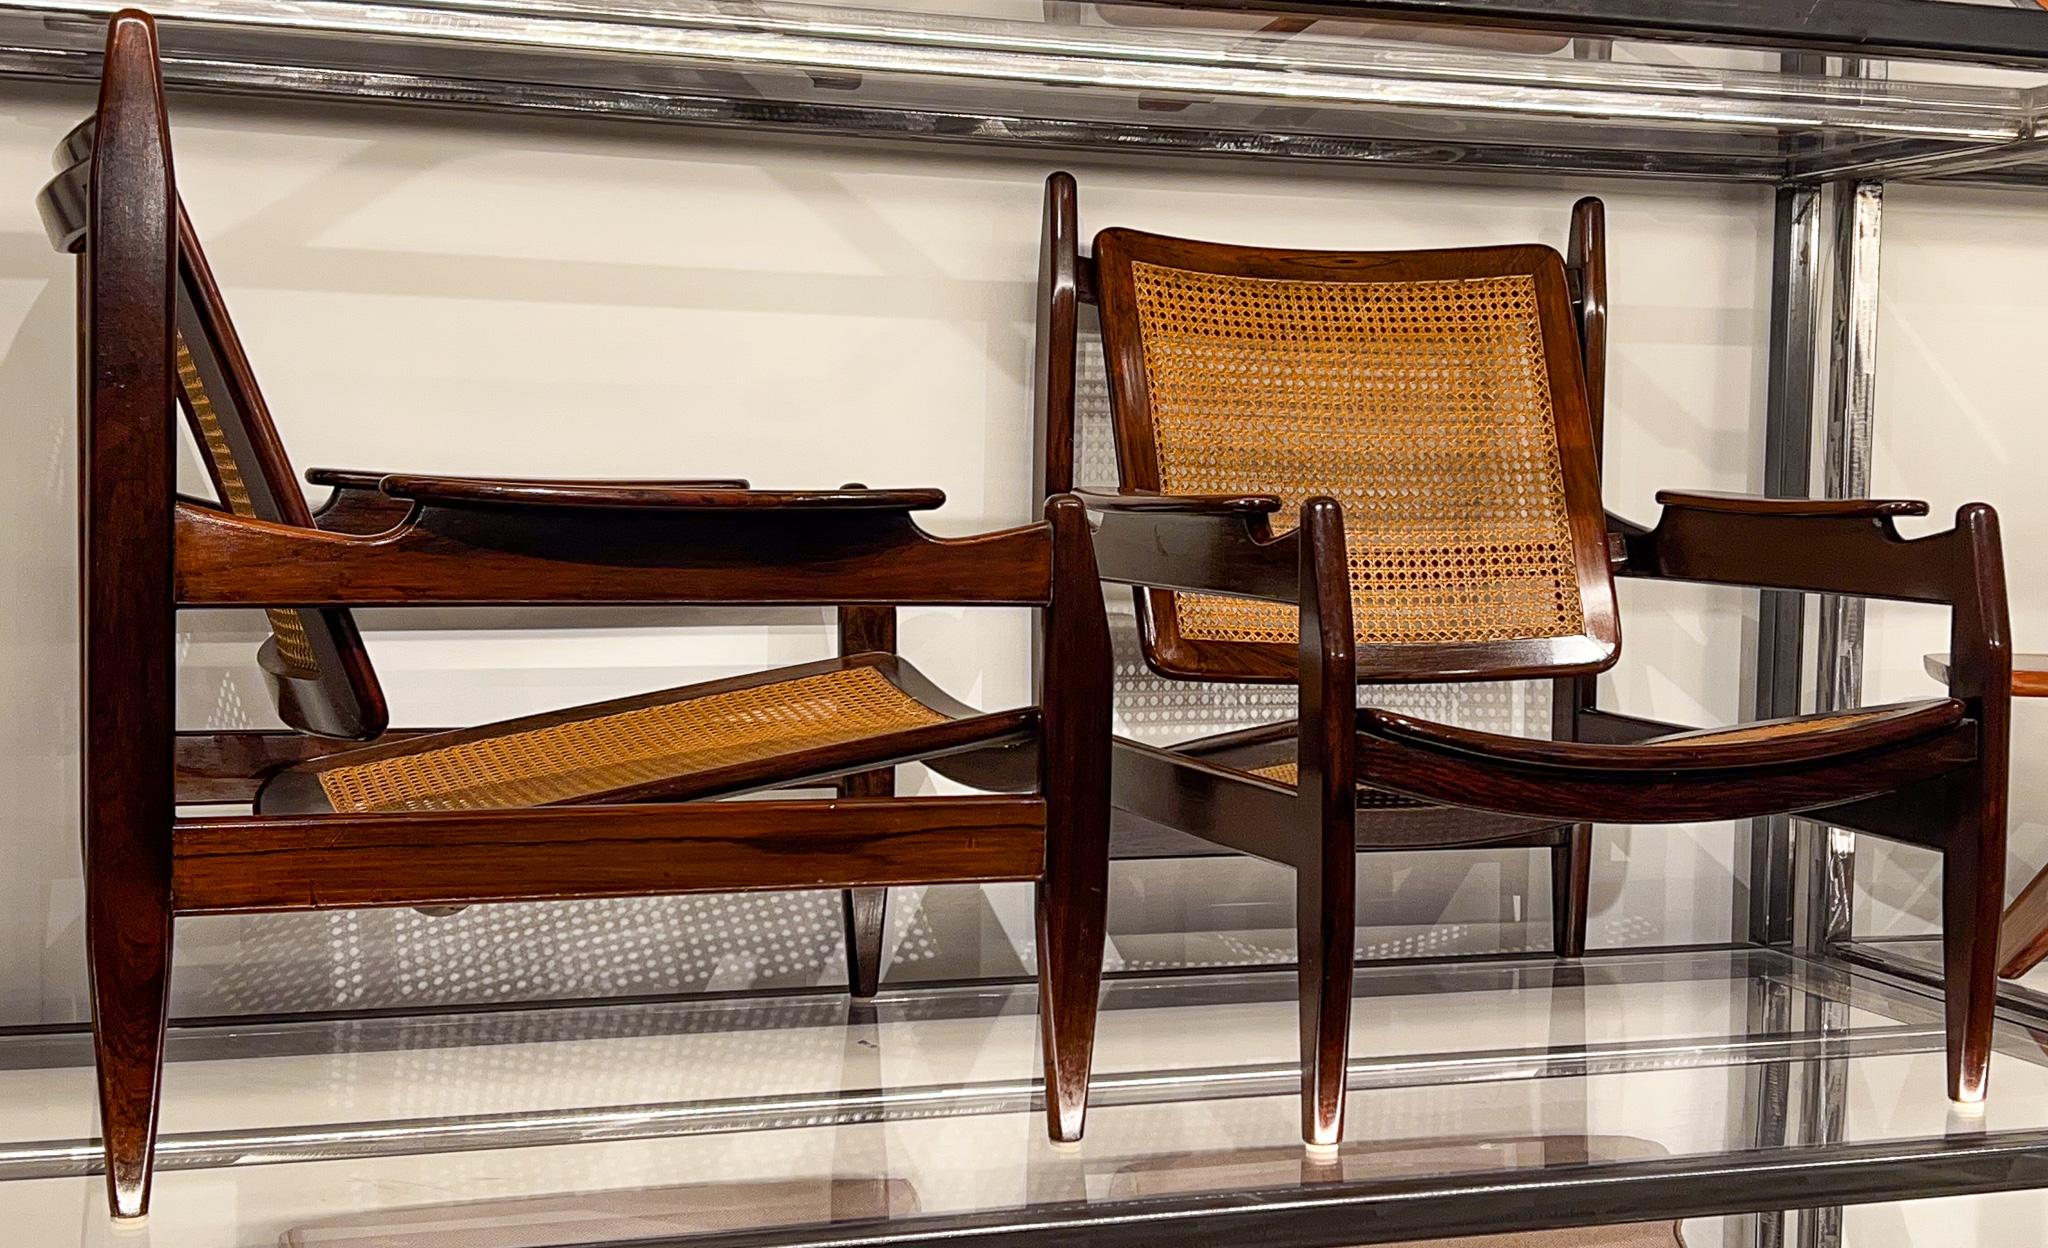 Woodwork Pair of Armchairs in Hardwood and Cane by Alexandre Rapoport, c. 1960s